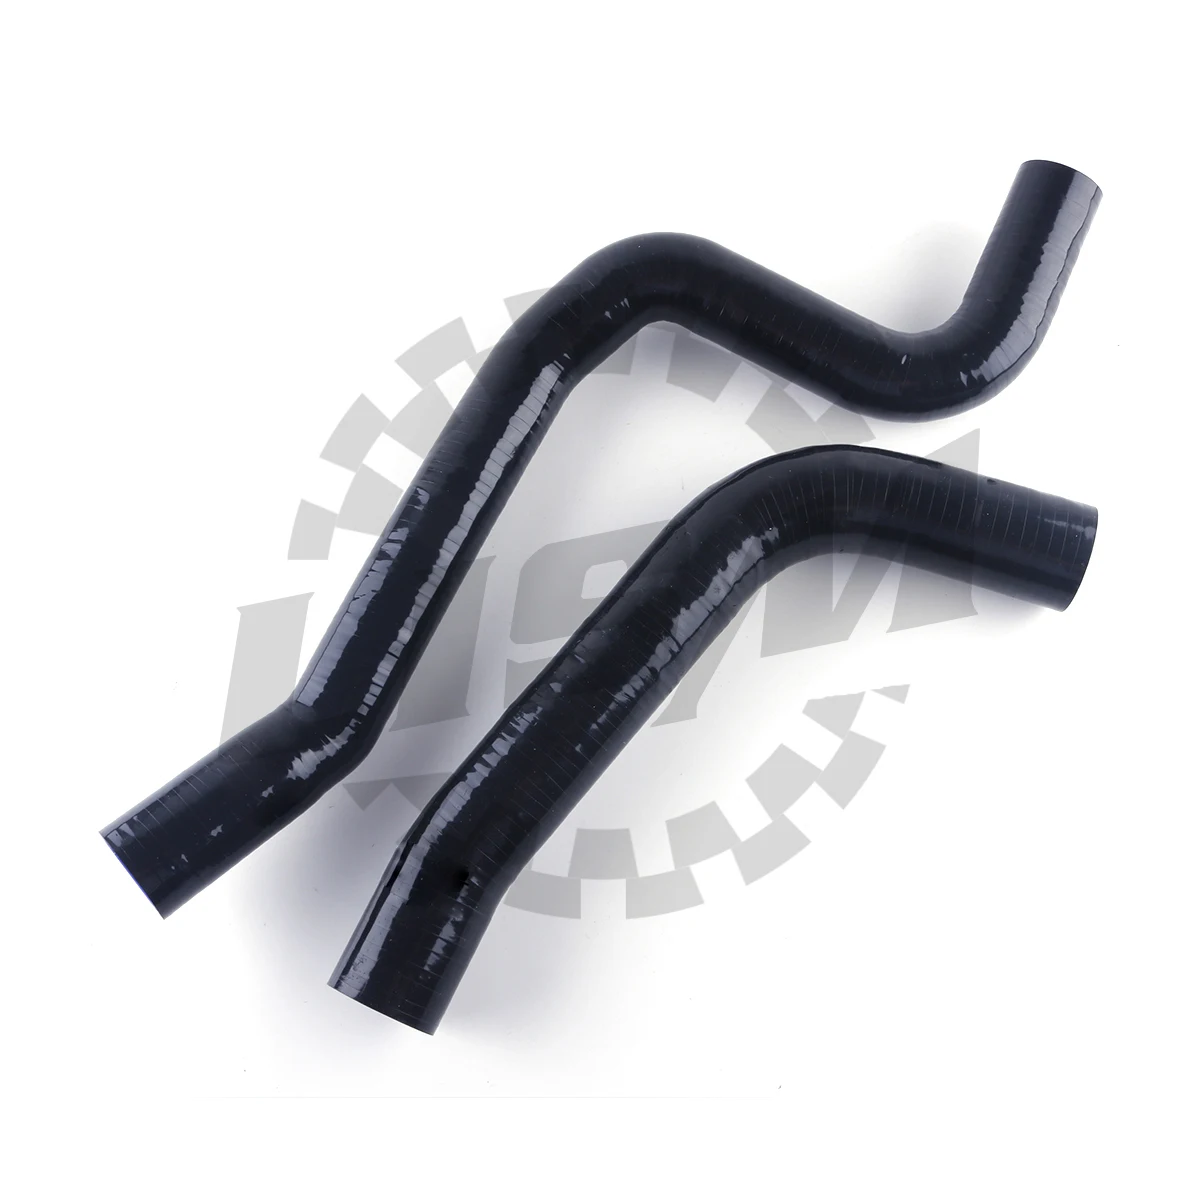 

2PCS Silicone Radiator Coolant Hose Kit For 1967-1969 GM Chevy Chevrolet CAMARO FIREBIRD Replacement Auto Parts 1968